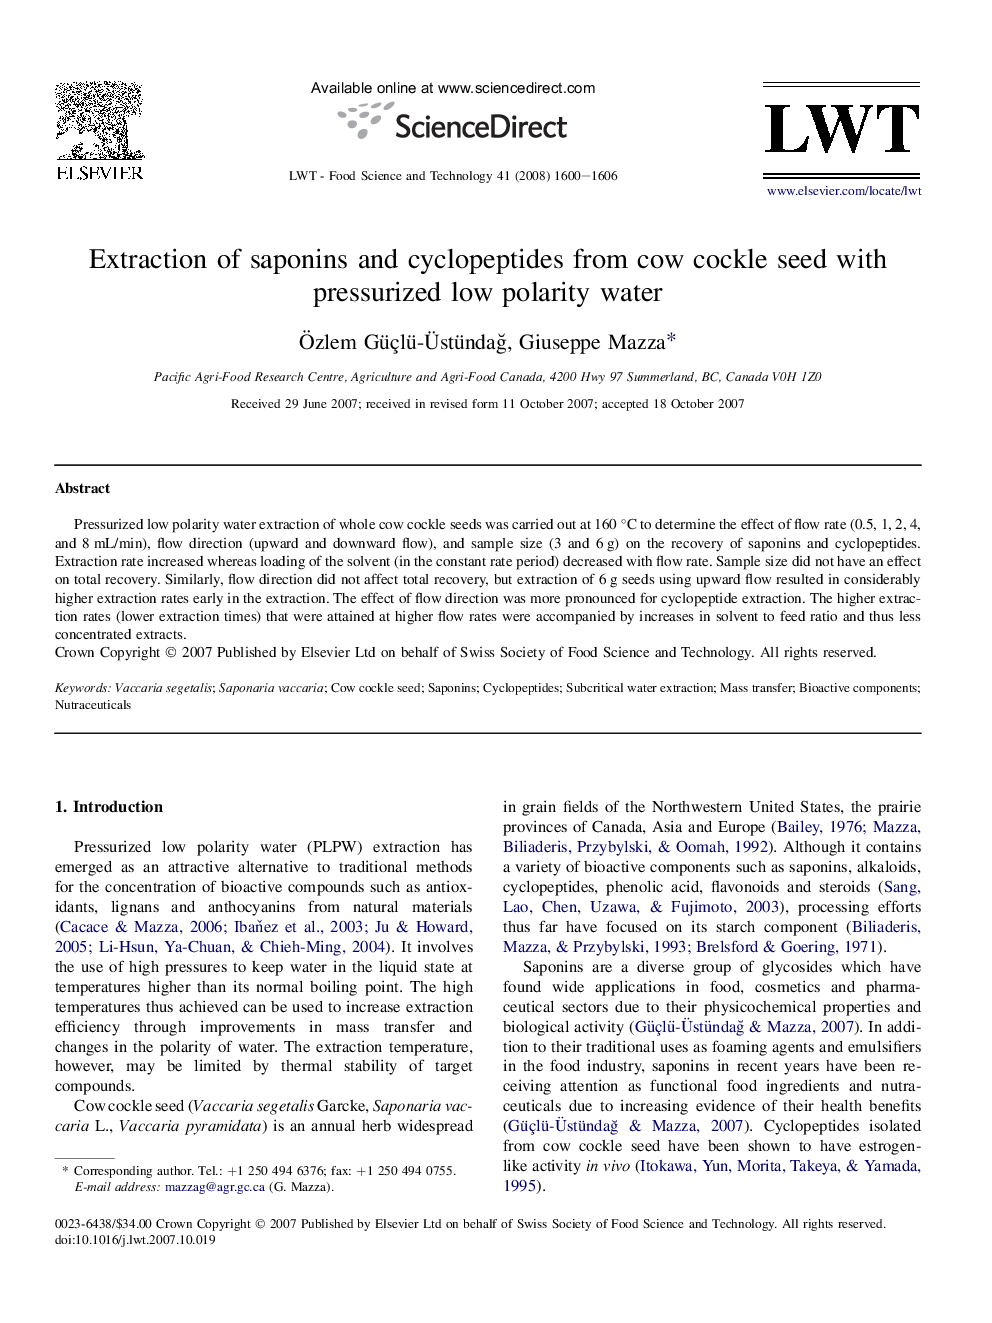 Extraction of saponins and cyclopeptides from cow cockle seed with pressurized low polarity water